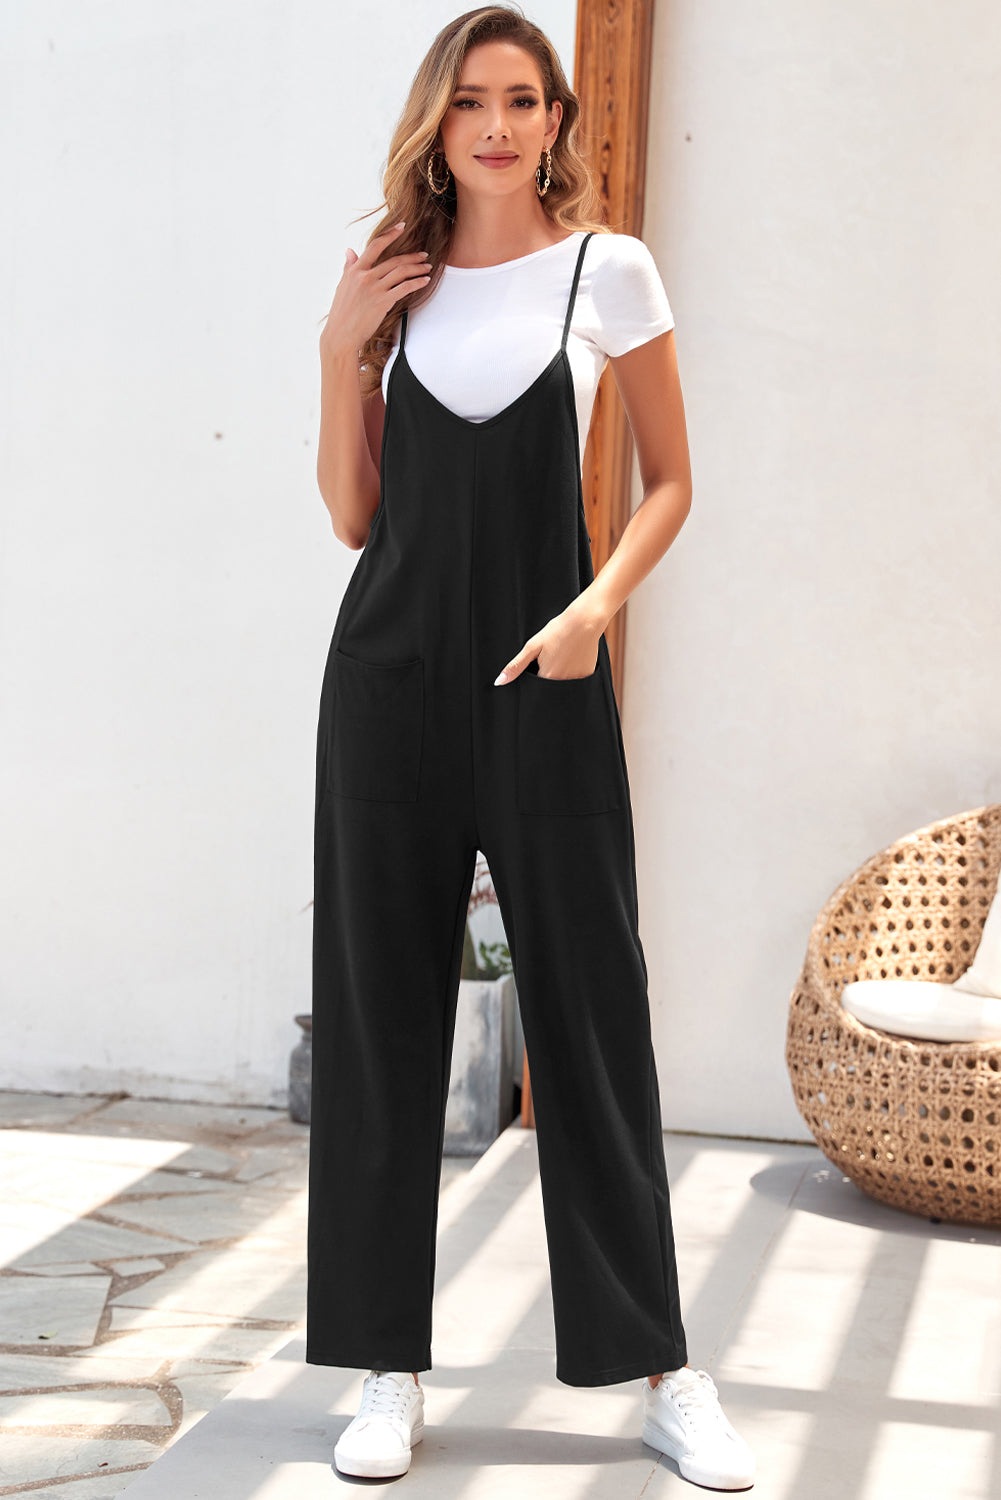 Rose Red Black Pocketed Adjustable Spaghetti Strap Straight Leg Jumpsuit Blue Zone Planet